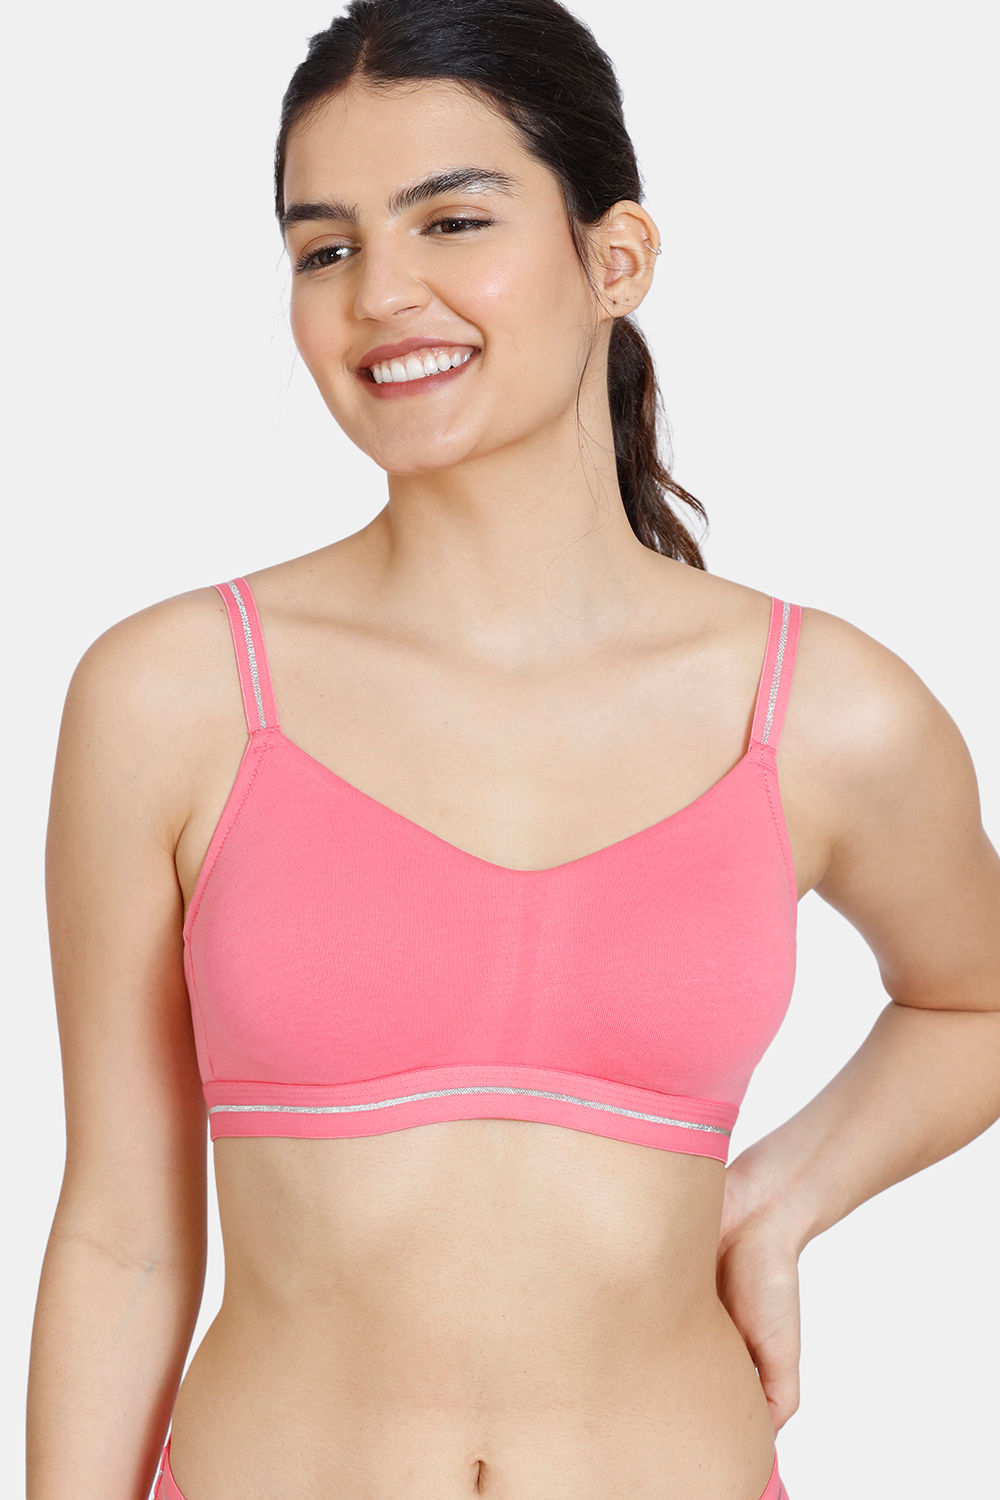 Le femi Women/Girls's Cotton Spandex Padded Non Wired Camisole Built-In Bra  With Removable And